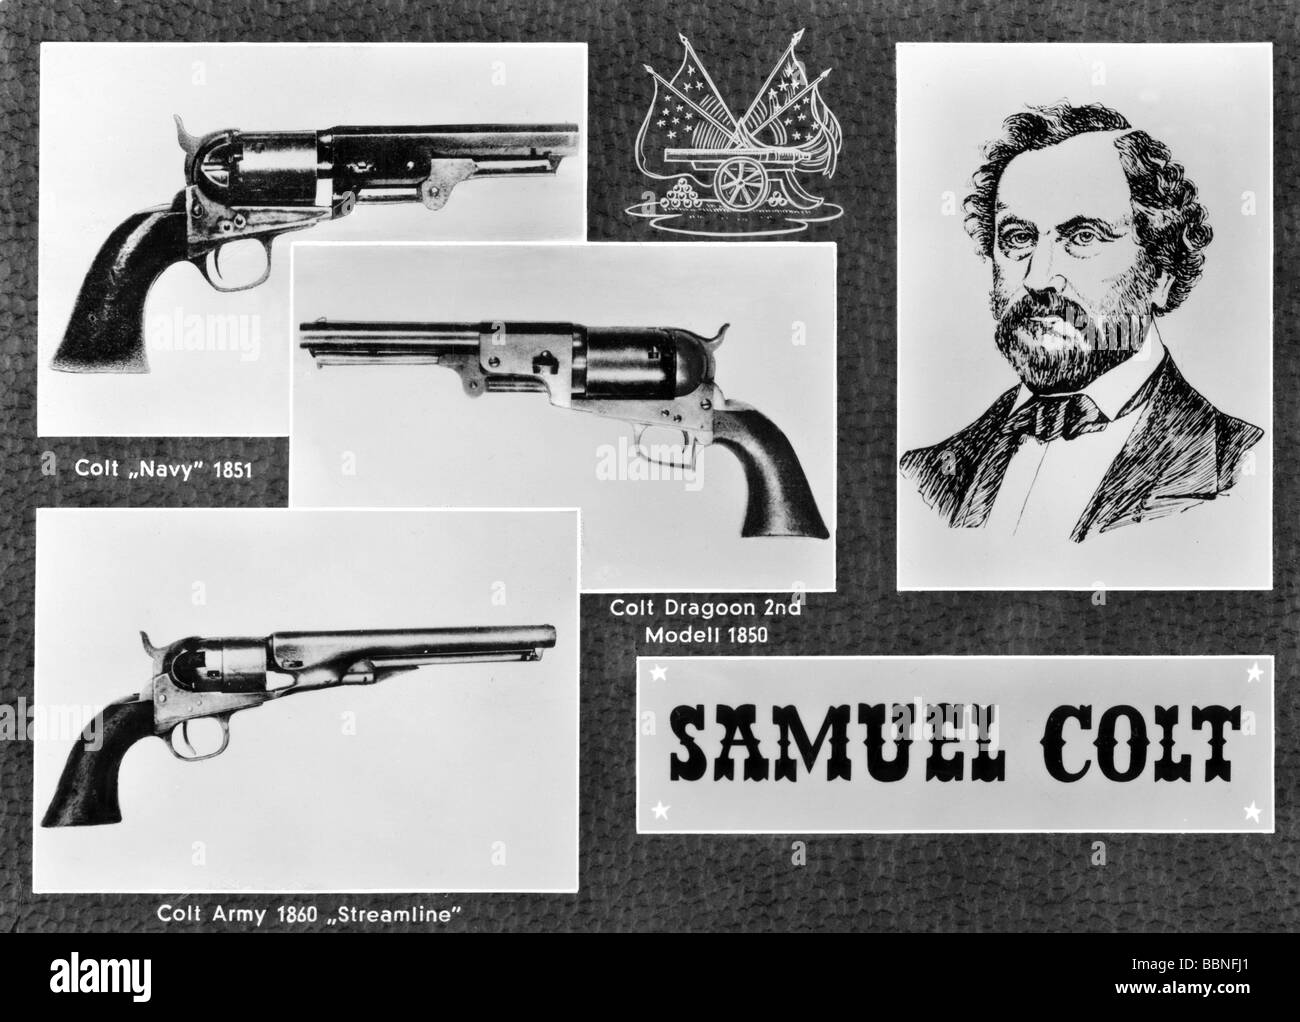 Colt, Samuel, 19.7.1814 - 10.1.1862, American weapon technician, constructor of the Colt 1835/1836, portrait and Colt 'Navy' 1851, Dragoon, 2nd 1950, Army 1860 'Streamline', Stock Photo